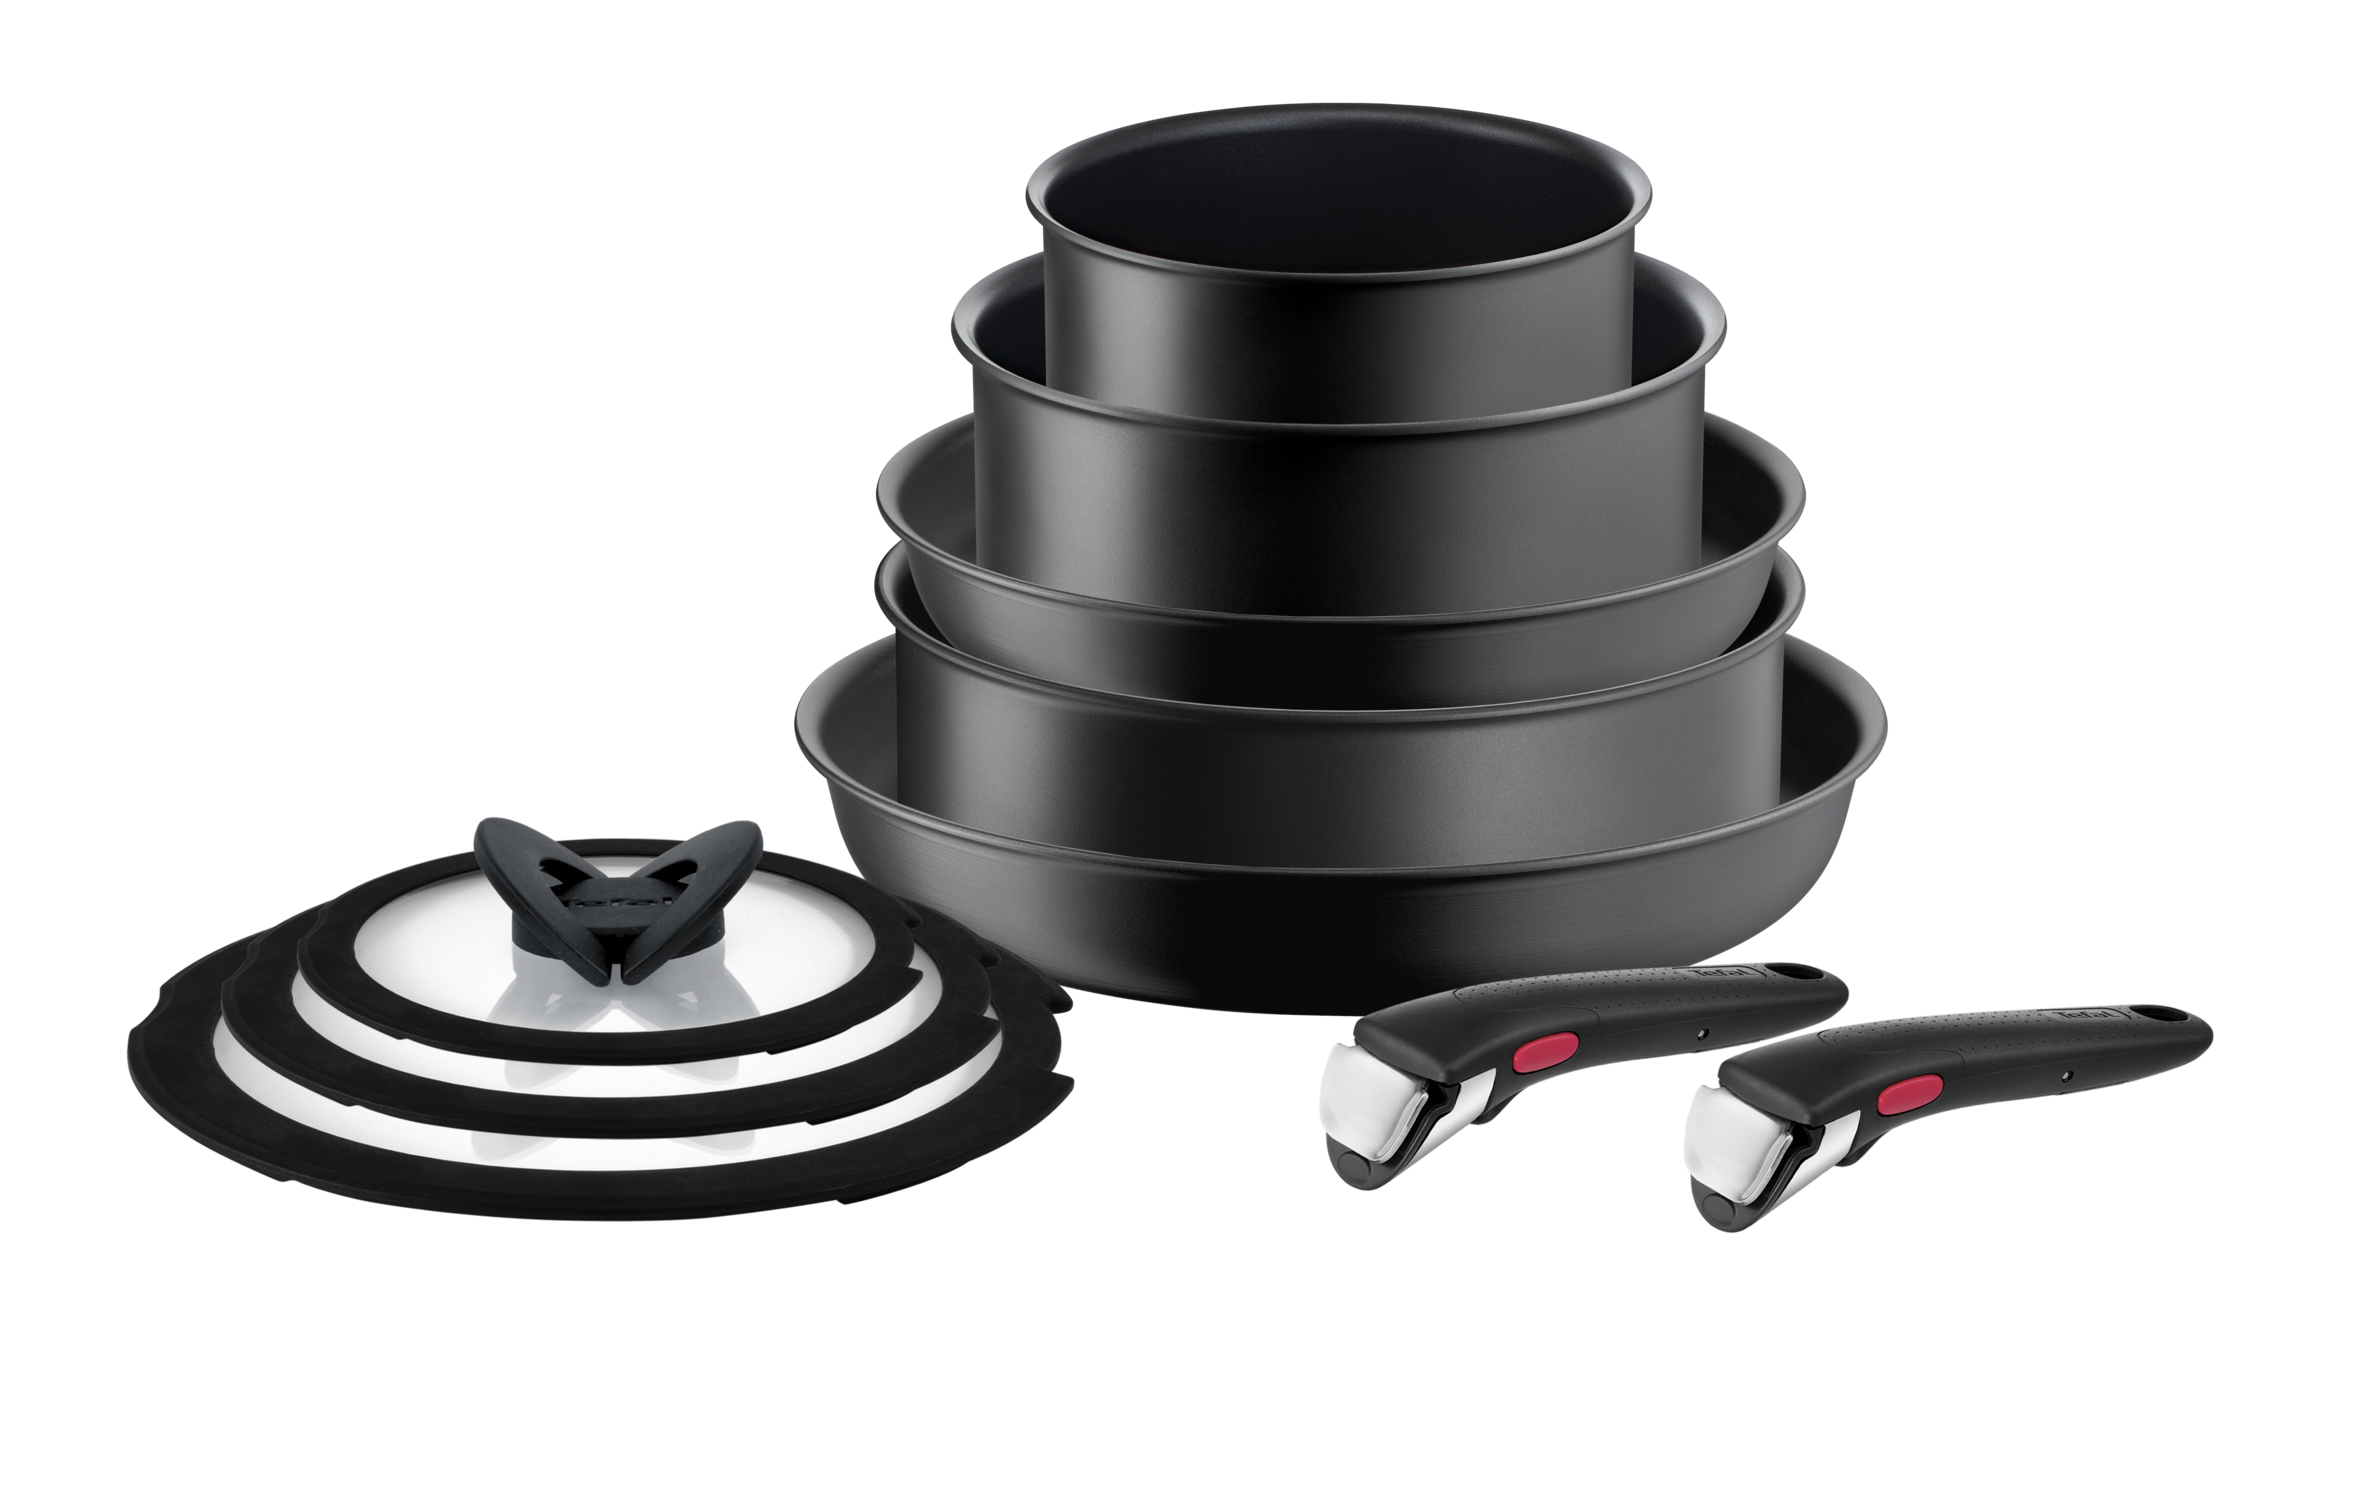  Tefal , Ingenio, Jamie Oliver, Stainless Steel, Cookware Set,  Pans: Home & Kitchen